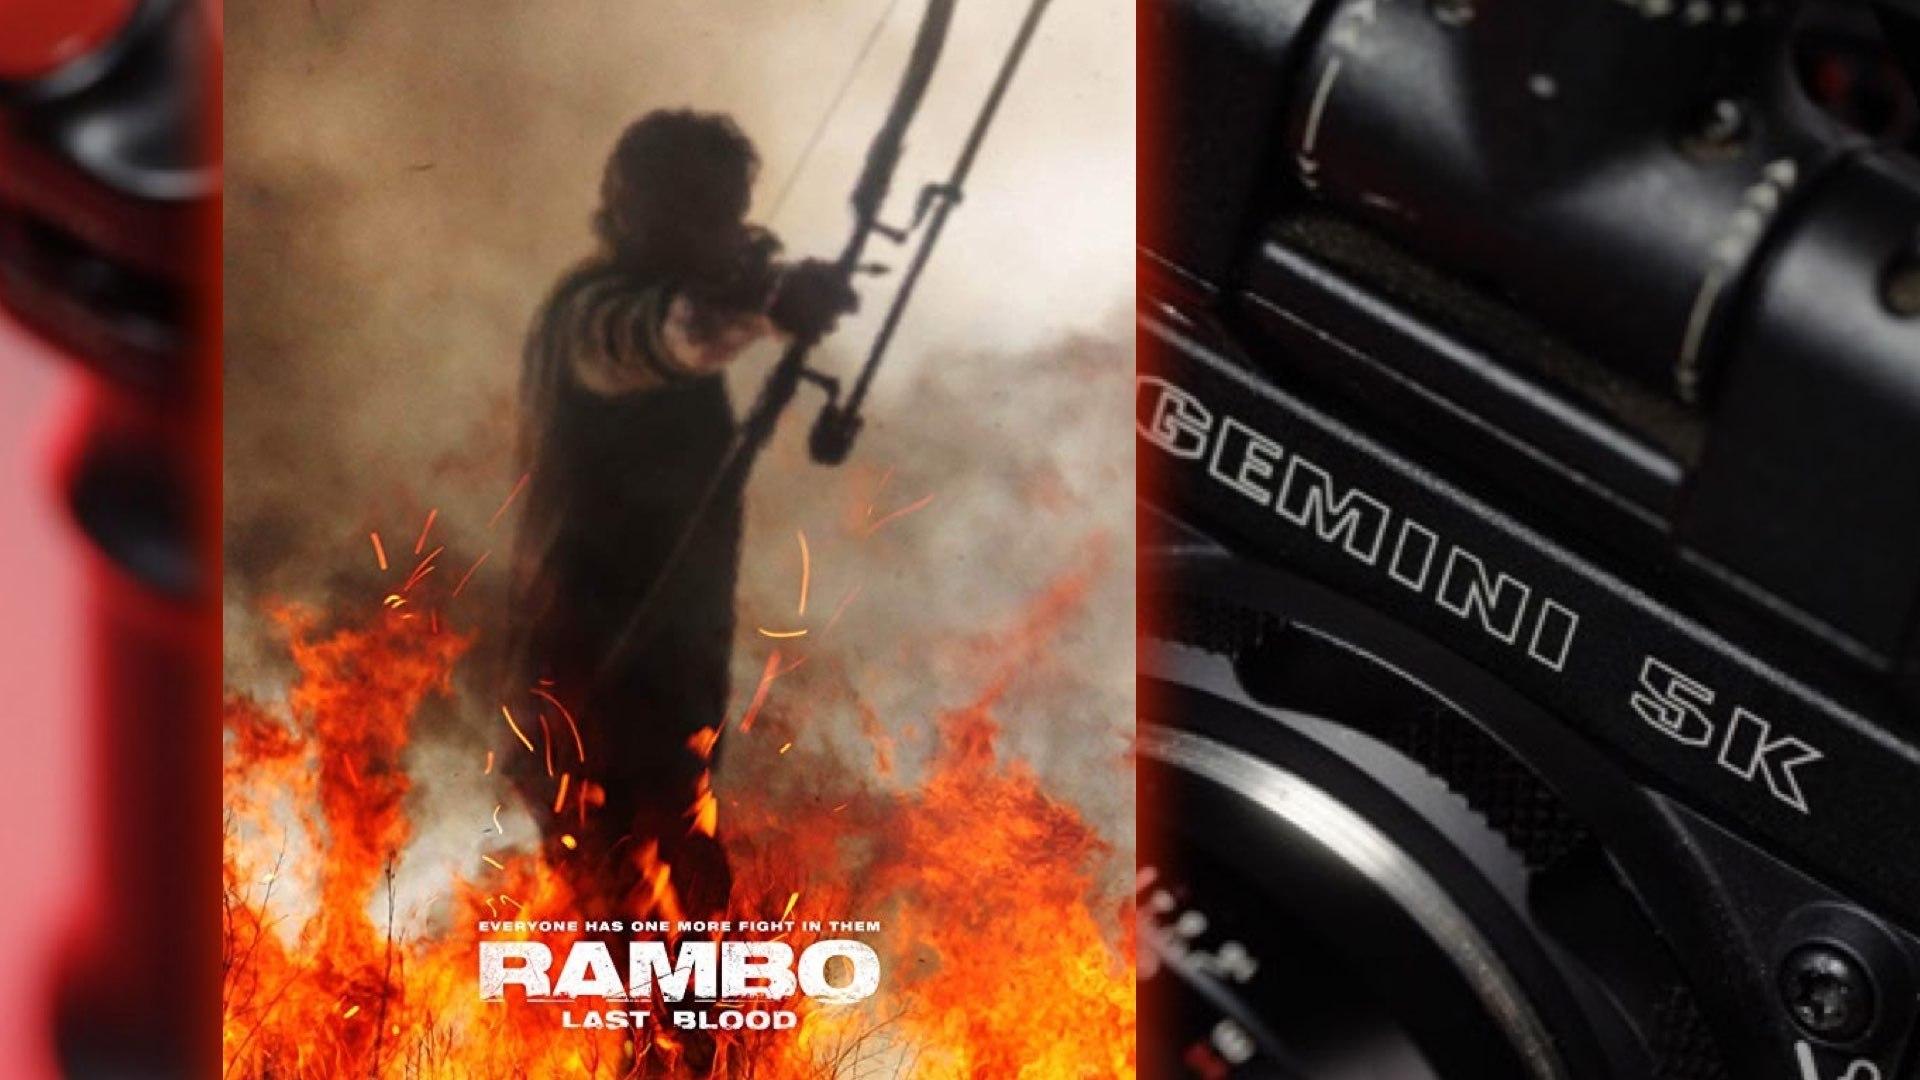 RAMBO LAST BLOOD is the First Hollywood Film Shot on the